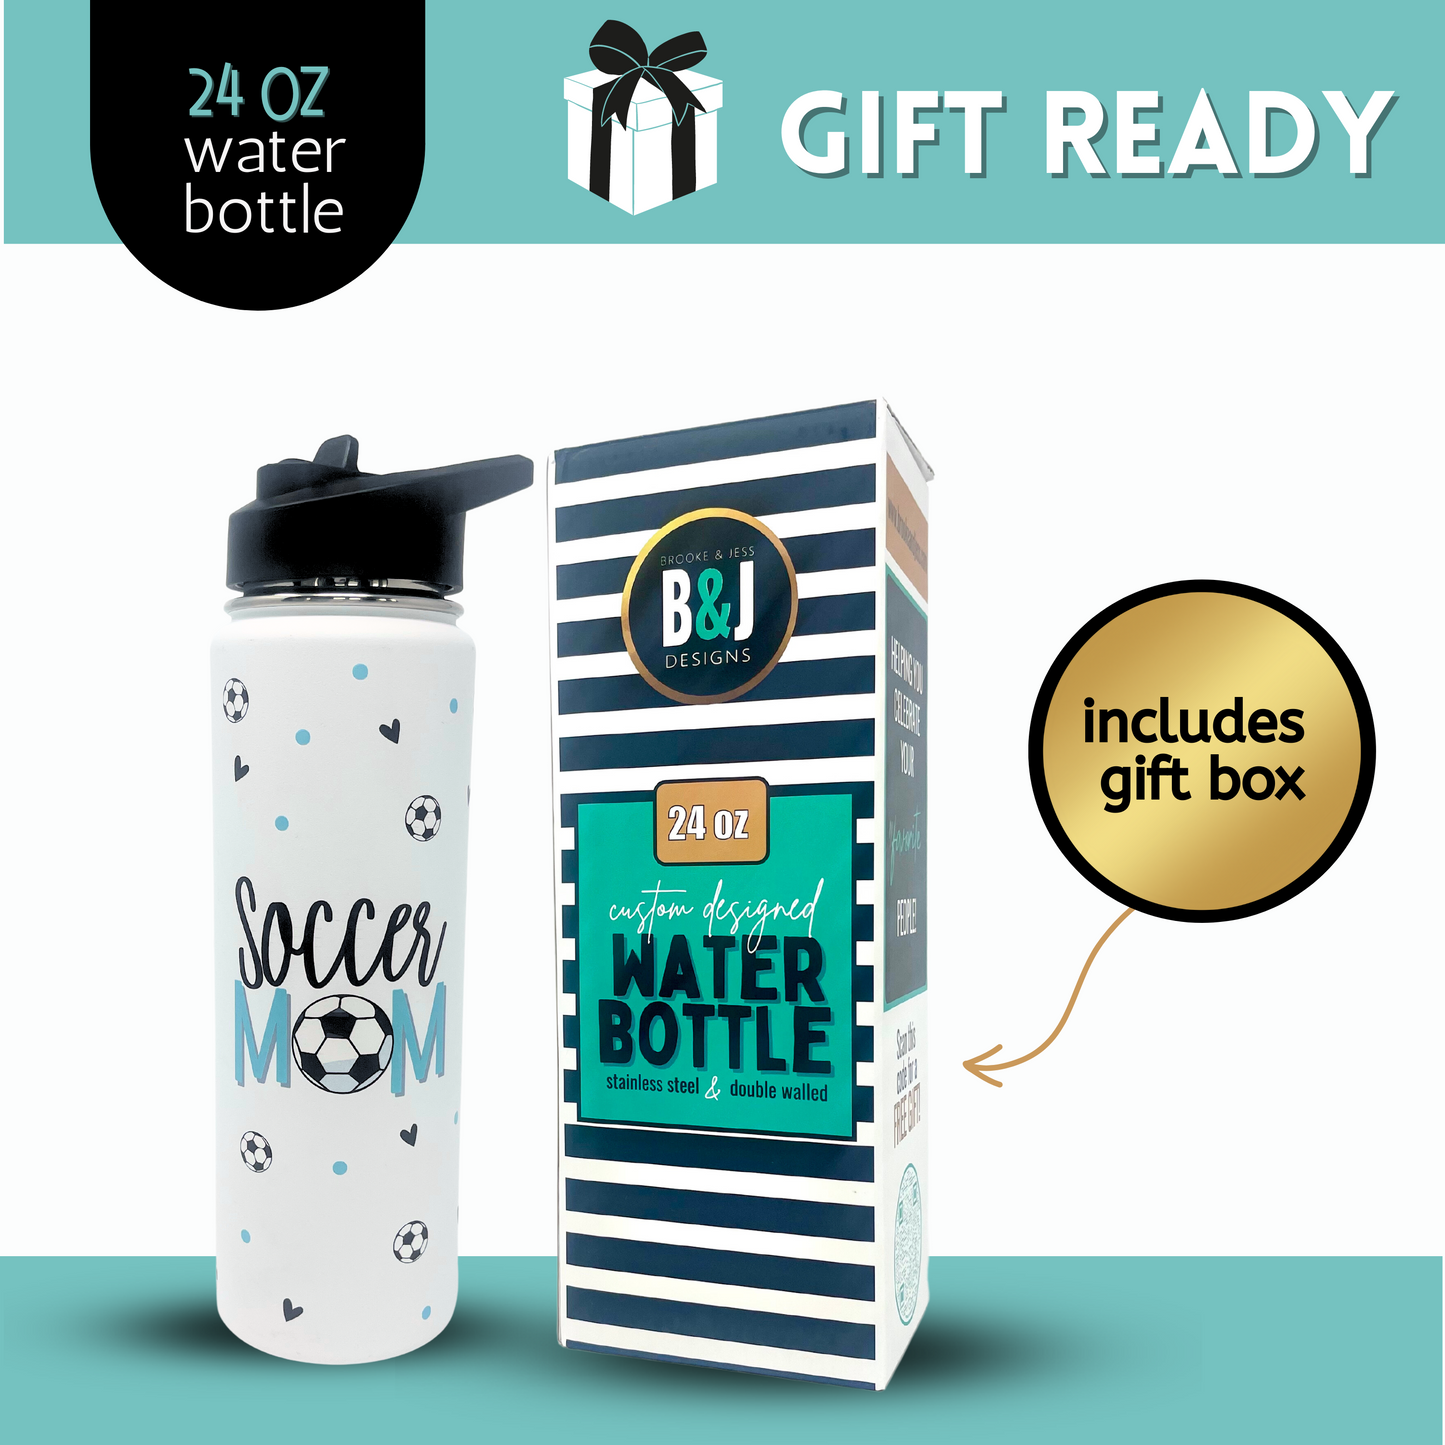 Soccer Mom Water Bottle- Large Insulated Water Bottle with Straw - Stainless Steel Metal 24 oz Travel Cup for Mom, Mama, Mother, Wife, Women | Keeps Hot and Cold for Hours